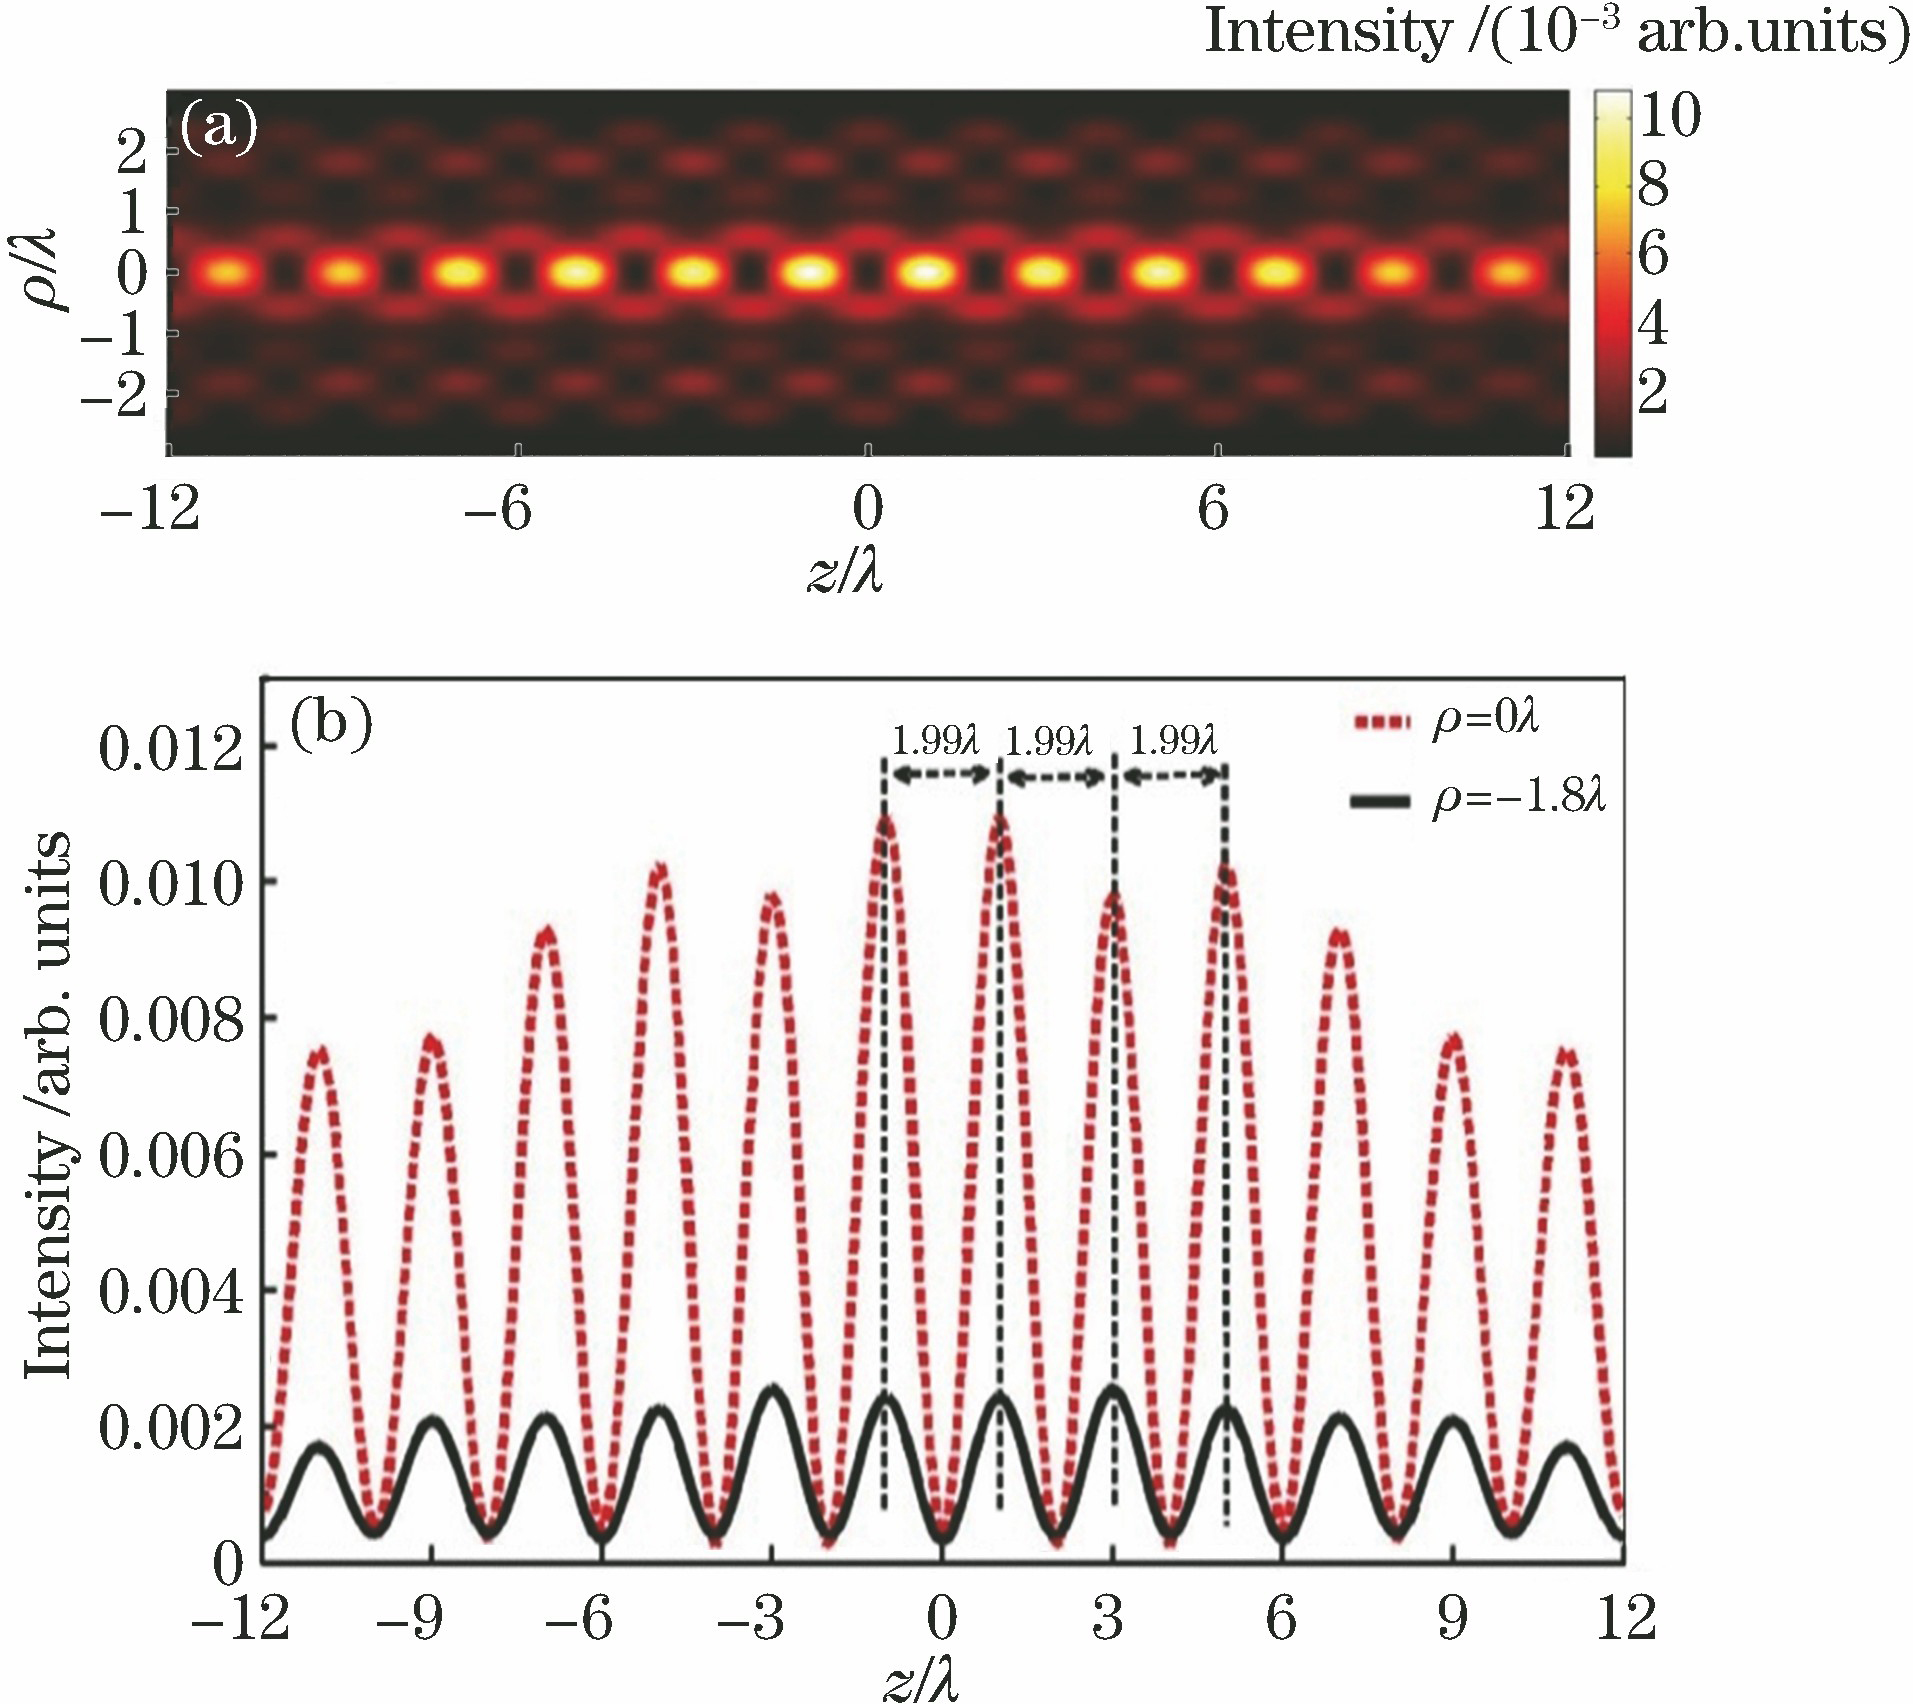 Intensity distribution. (a) Intensity distribution on ρ-z plane; (b) line diagram distribution of main optical chain at ρ=0λ and secondary optical chain at ρ=-1.8λ along z direction